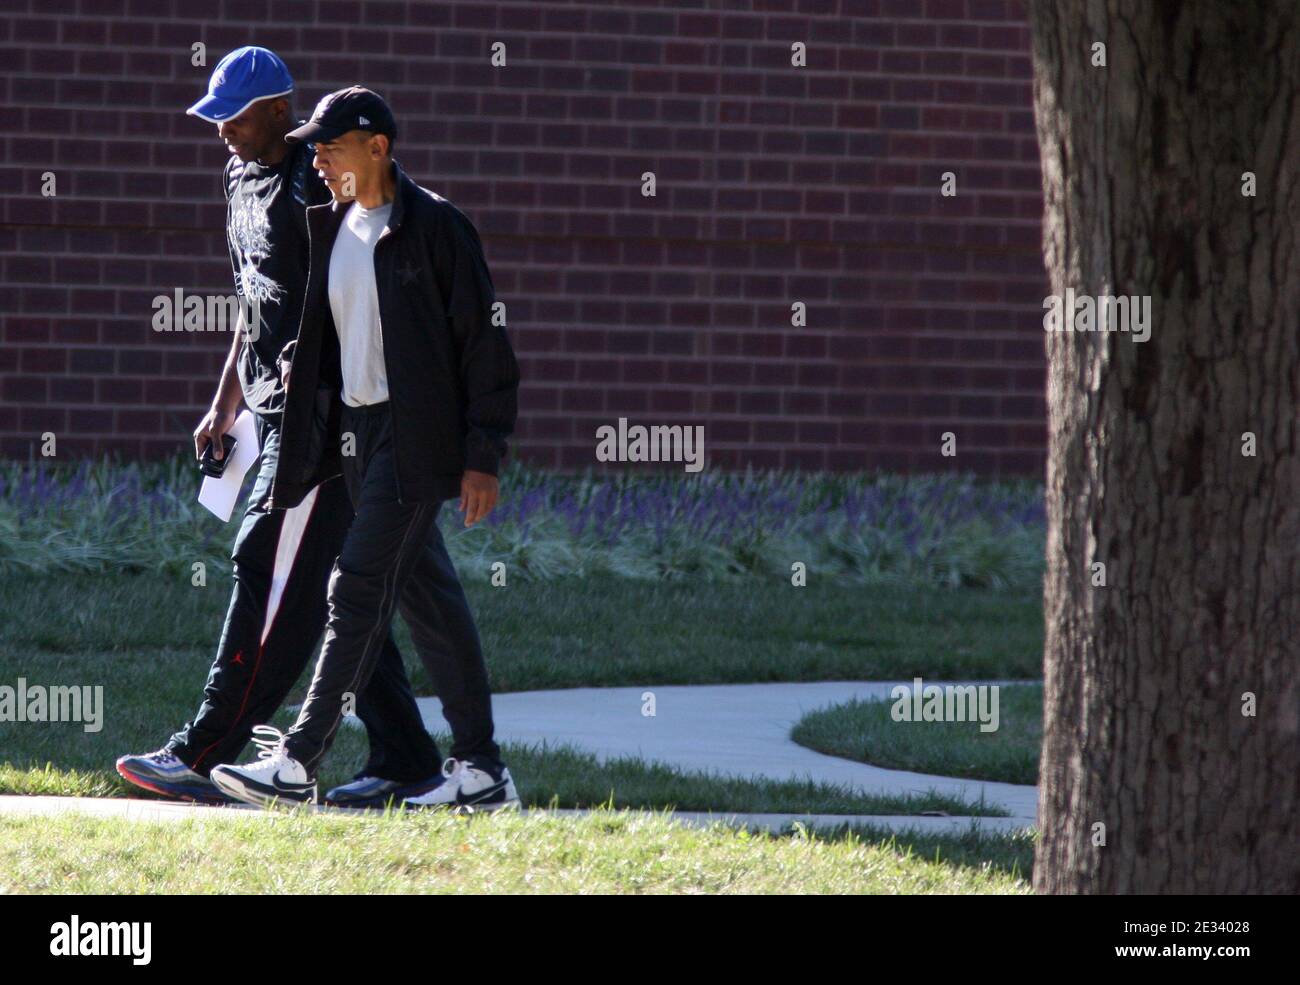 President Barack Obama walks with his personal aide, Reggie Love, as the two arrive at Fort Leslie J. McNair's athletic facility for a morning game of basketball in Washington, DC, USA on September 18, 2010. Photo by Martin H. Simon/ABACAPRESS.COM (Pictured: Barack Obama, Reggie Love) Stock Photo